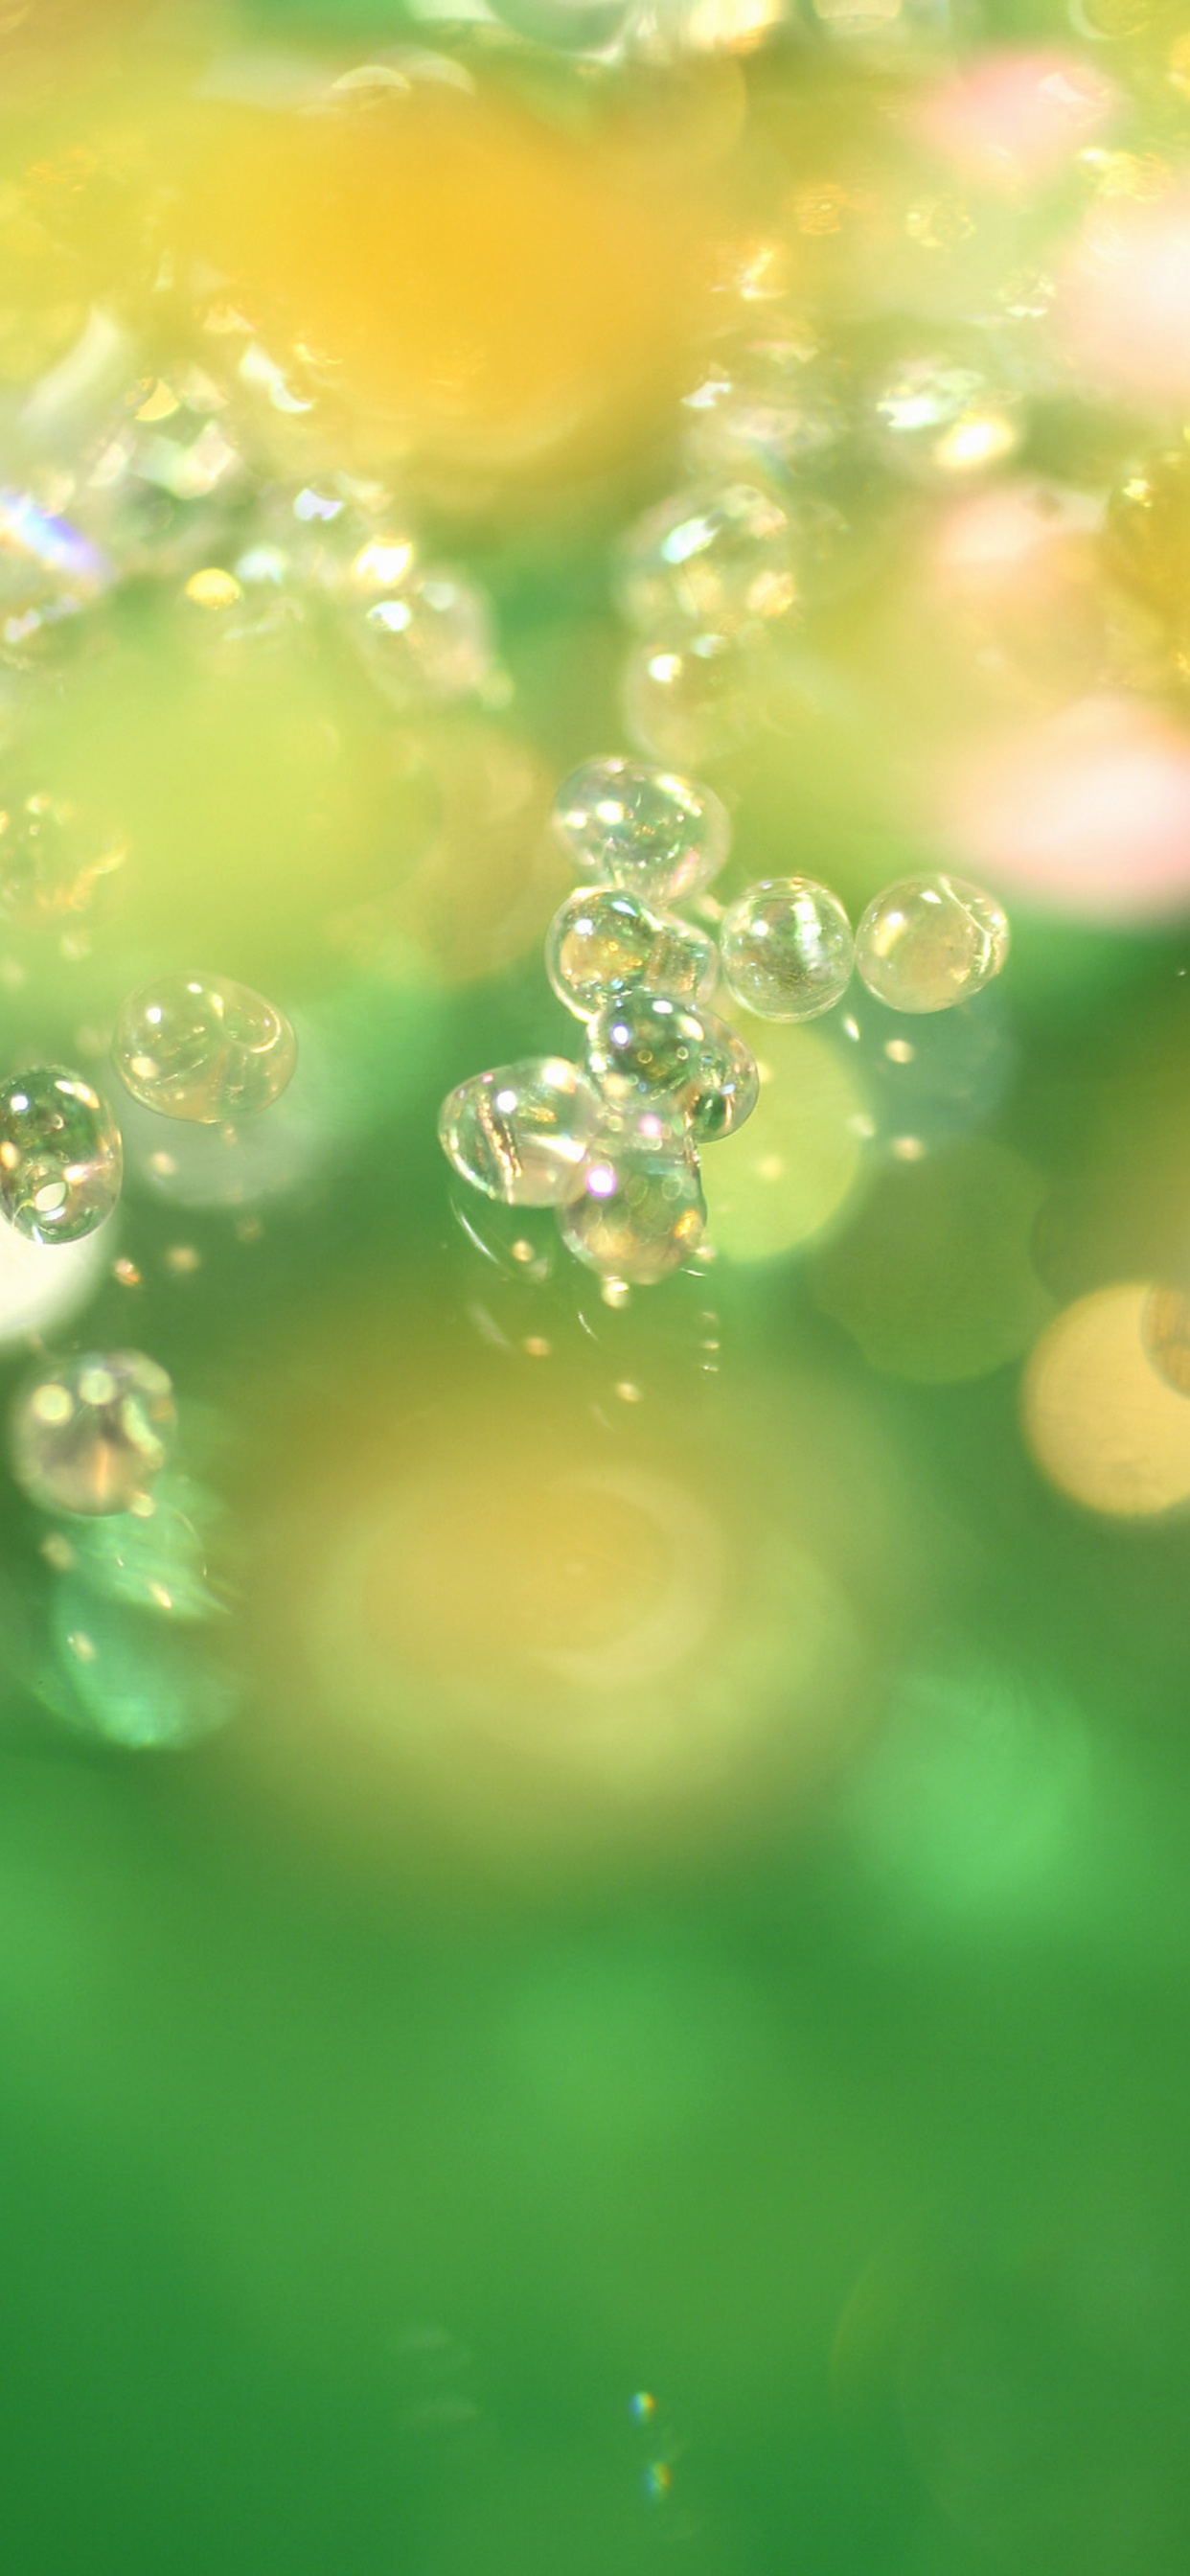 Water Droplets on Green Surface. Wallpaper in 1242x2688 Resolution